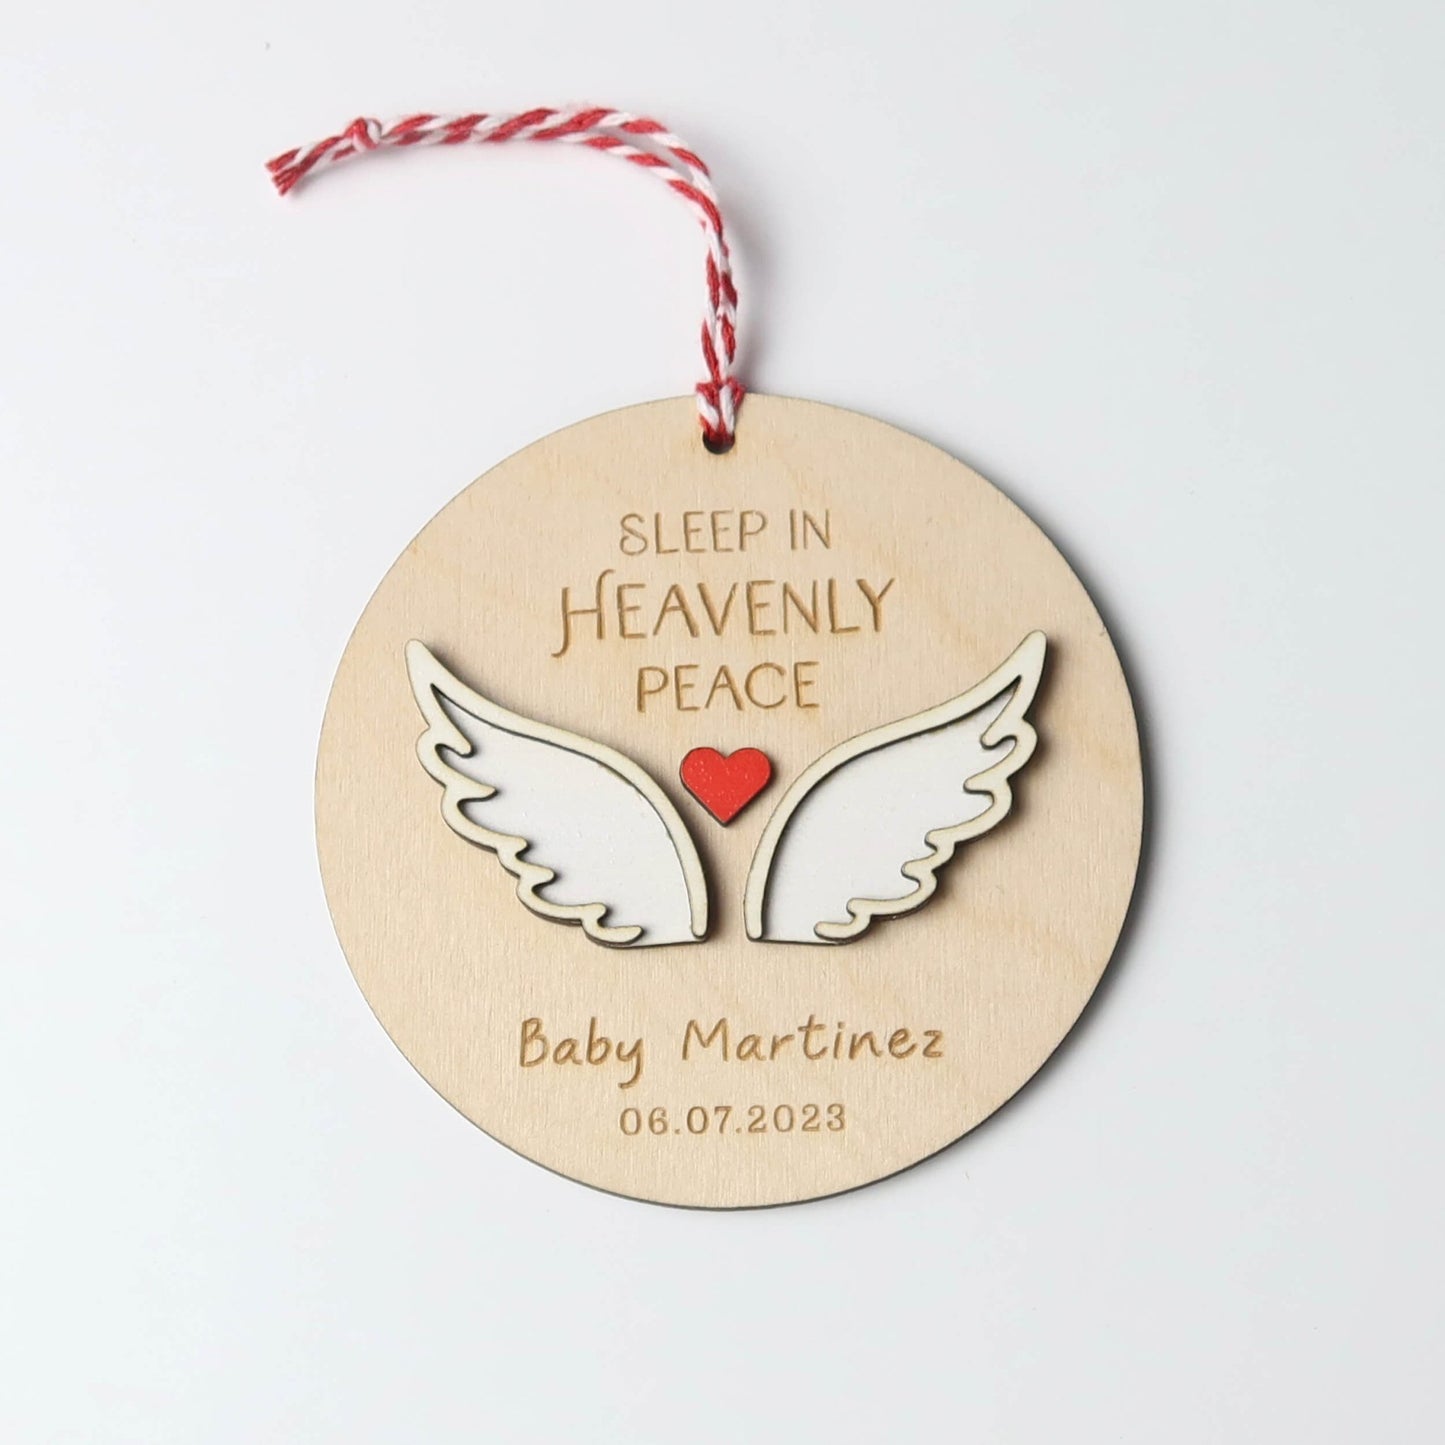 Sleep in Heavenly Peace Personalized Memorial Ornament - Holiday Ornaments - Moon Rock Prints